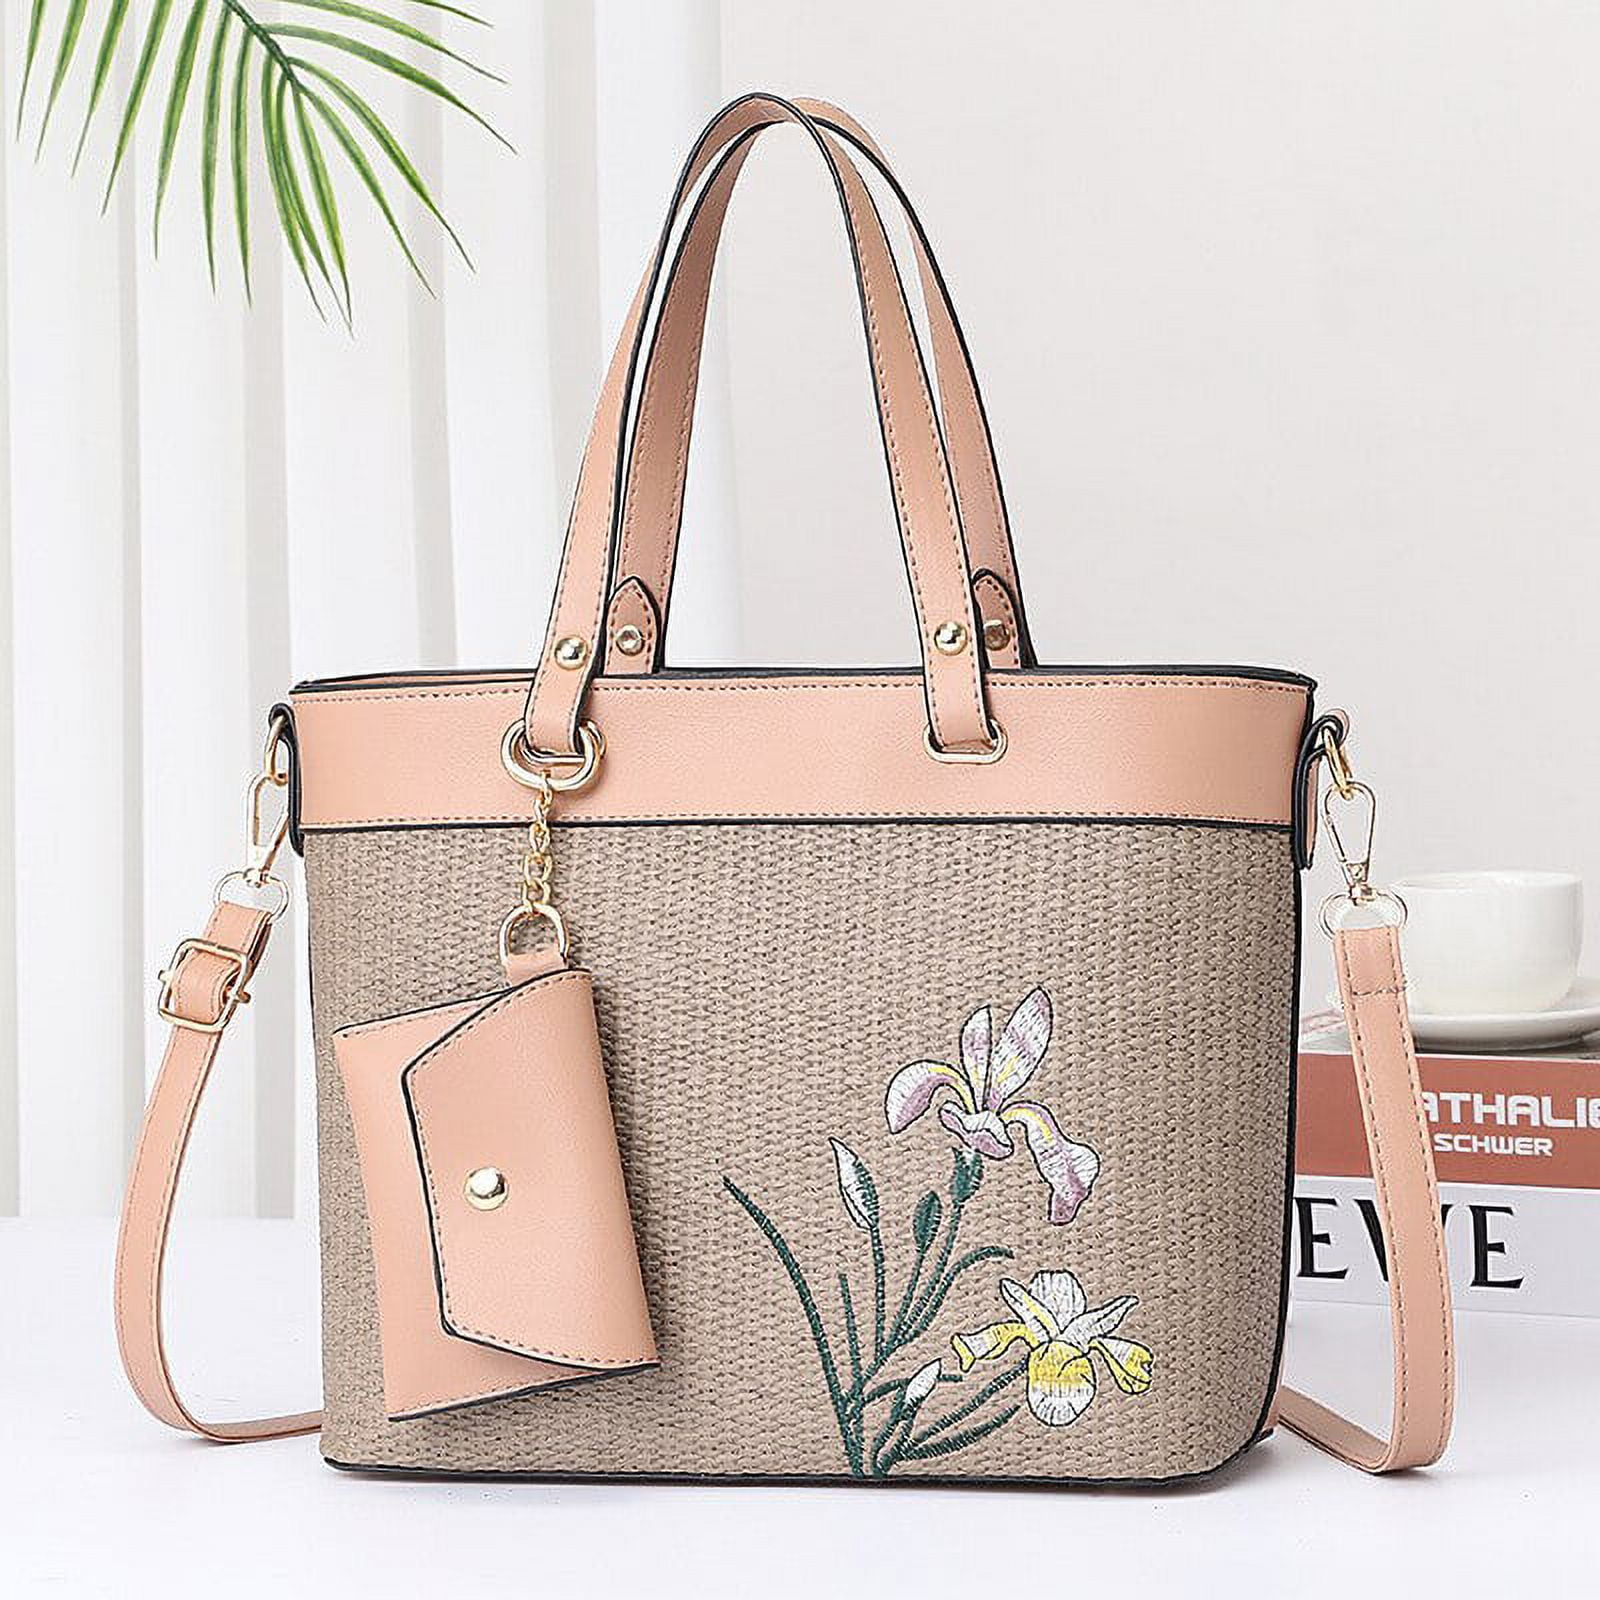 Ladies Bags, Wallets, Backpacks, Clutches, Women Handbags 👜 with price, Potli bags